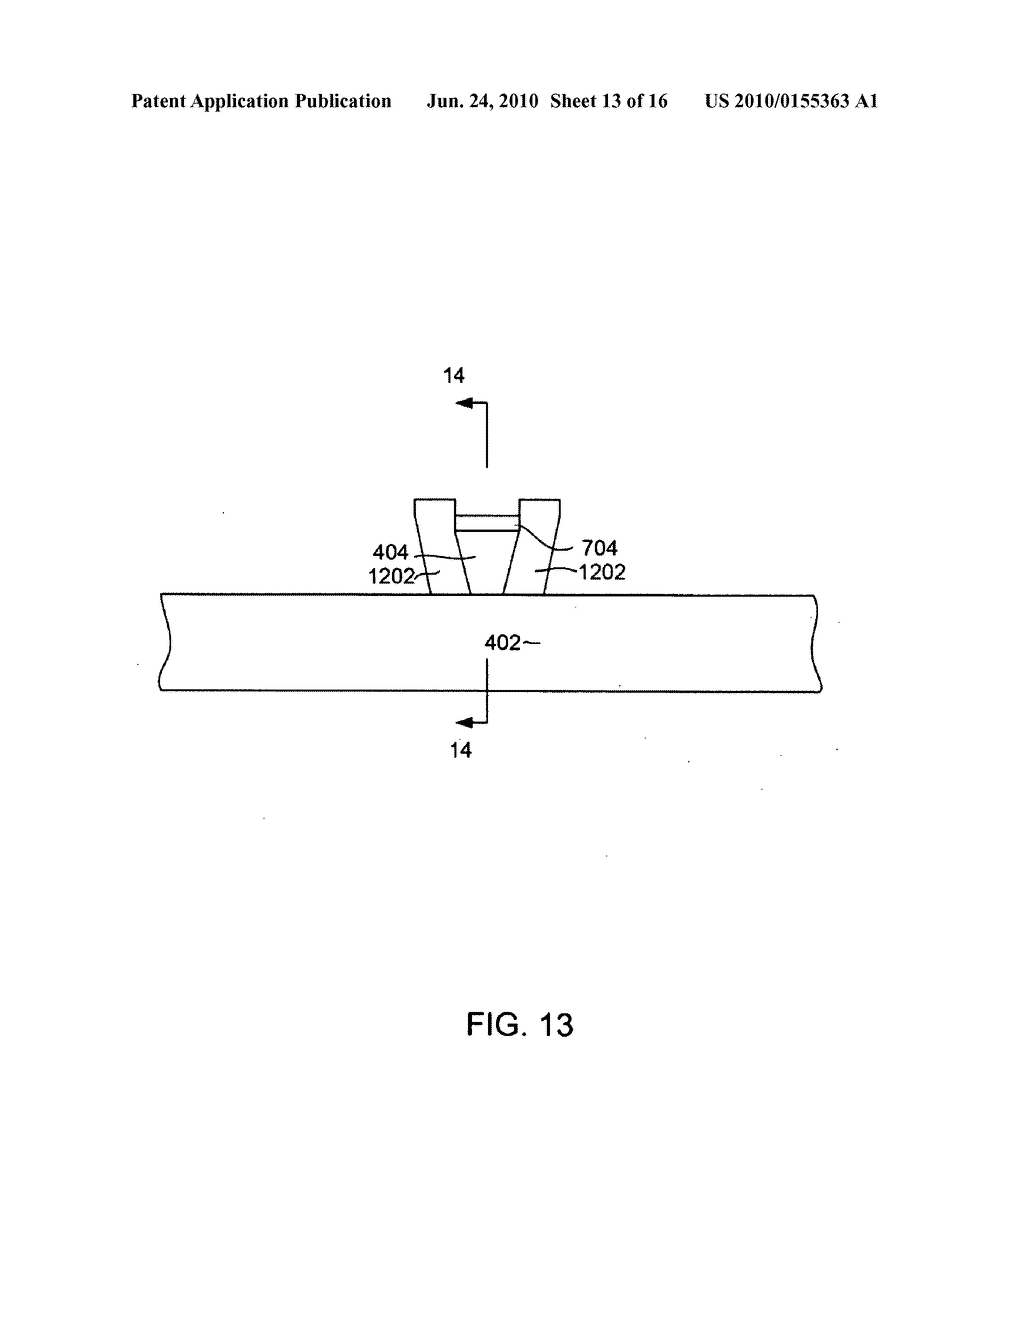 METHOD FOR MANUFACTURING A MAGNETIC WRITE HEAD HAVING A WRITE POLE WITH A TRAILING EDGE TAPER USING A RIEABLE HARD MASK - diagram, schematic, and image 14